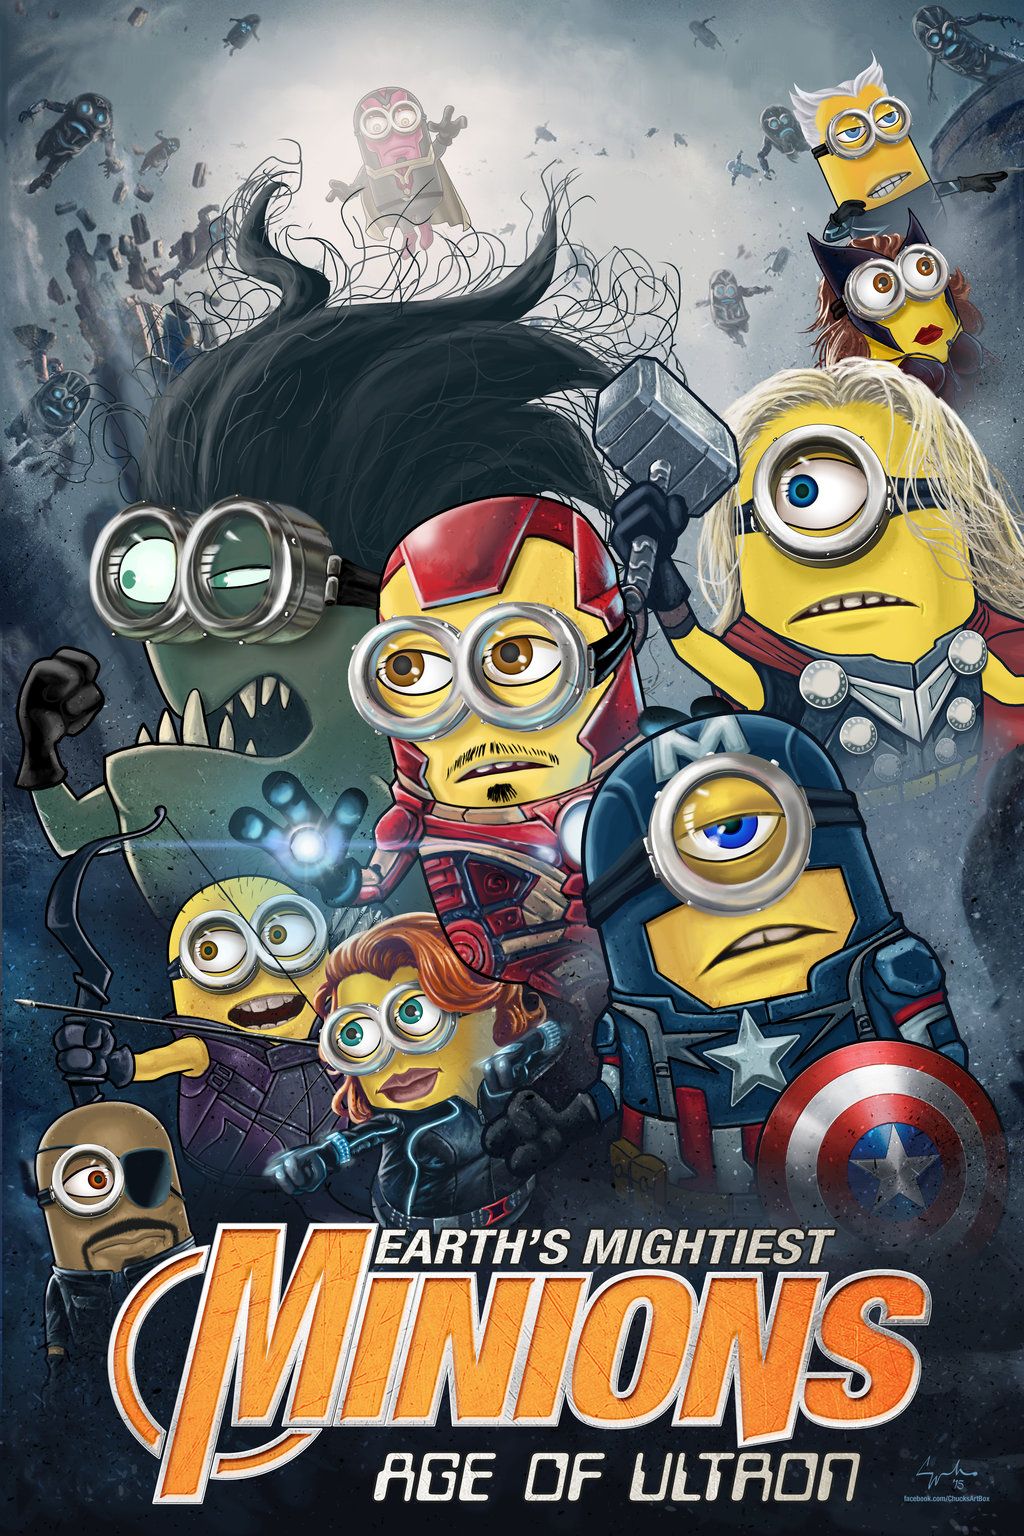 Earth's Mightiest Minions Avengers Age of Ultron. Minion avengers, Minion art, Minions wallpaper